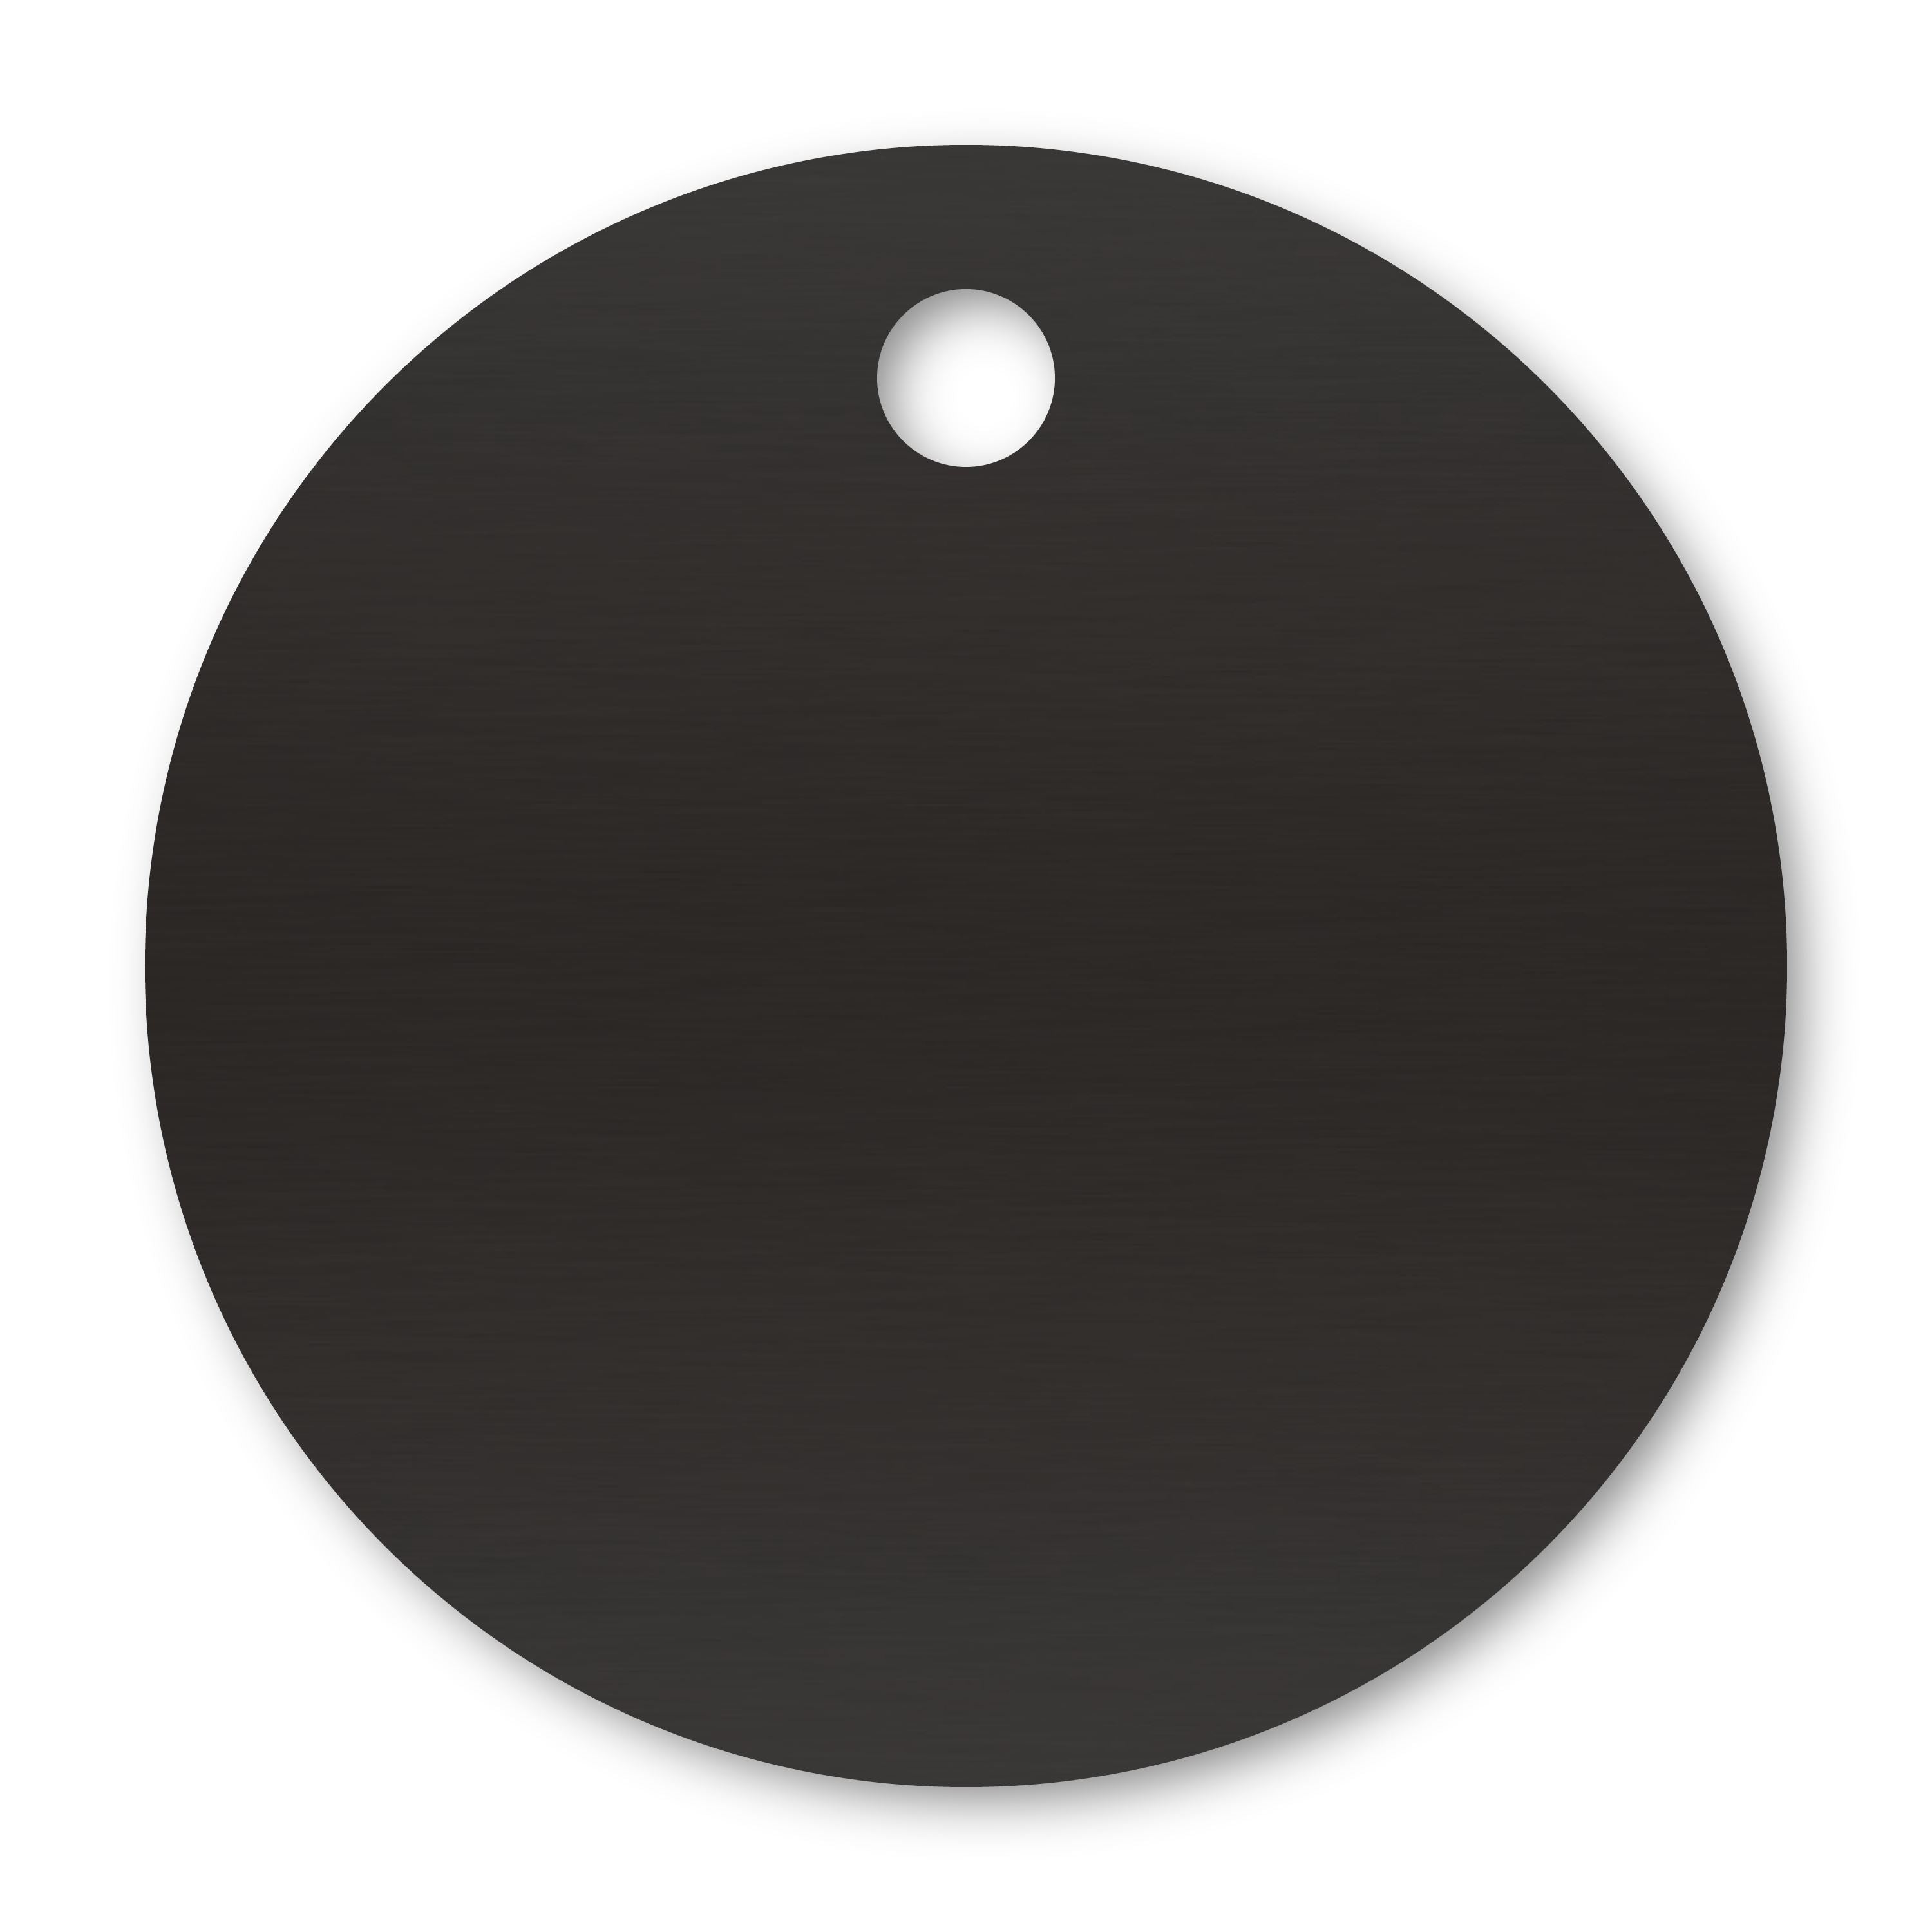 Anodized Aluminum Round Tags, 2" with 3/16" Hole, Laser Engraved Metal Tags Craftworks NW Black 